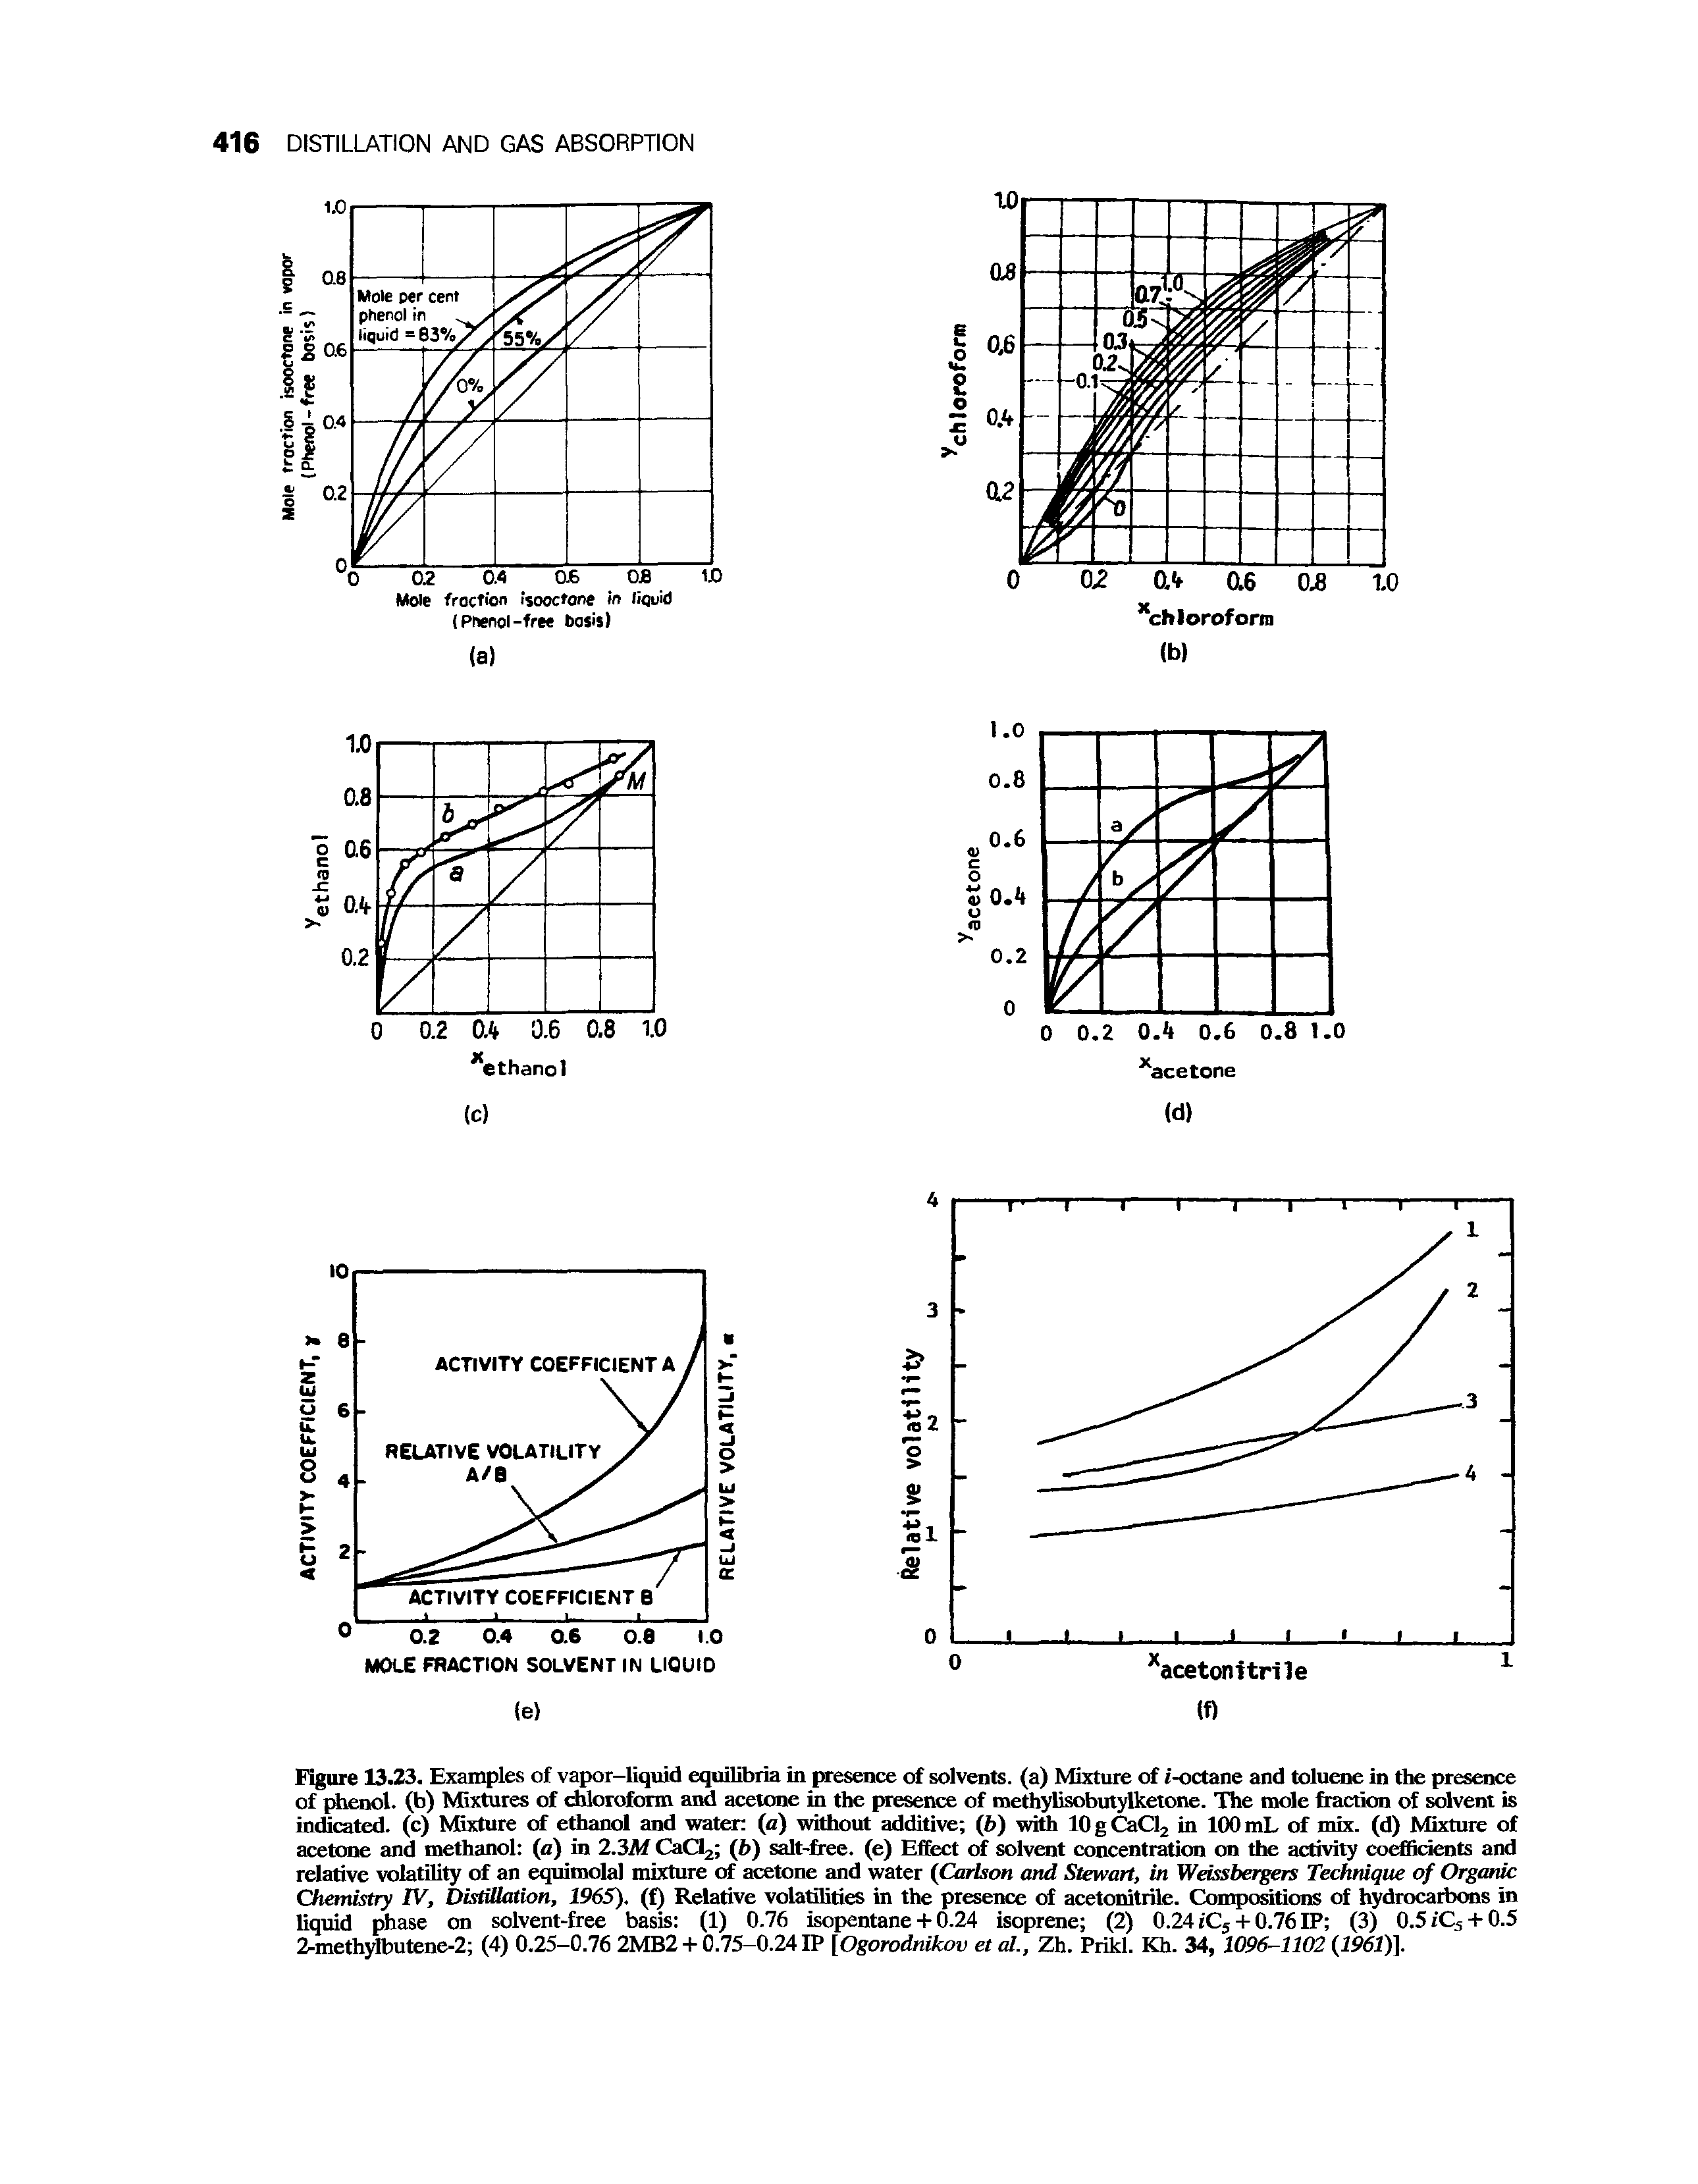 Figure 13.23. Examples of vapor-liquid equilibria in presence of solvents, (a) Mixture of-octane and toluene in the presence of phenol, (b) Mixtures of chloroform and acetone in the presence of methylisobutylketone. The mole fraction of solvent is indicated, (c) Mixture of ethanol and water (a) without additive (b) with 10gCaCl2 in 100 mL of mix. (d) Mixture of acetone and methanol (a) in 2.3Af CaCl2 ip) salt-free, (e) Effect of solvent concentration on the activity coefficients and relative volatility of an equimolal mixture of acetone and water (Carlson and Stewart, in Weissbergers Technique of Organic Chemistry IV, Distillation, 1965). (f) Relative volatilities in the presence of acetonitrile. Compositions of hydrocarbons in liquid phase on solvent-free basis (1) 0.76 isopentane + 0.24 isoprene (2) 0.24 iC5 + 0.76 IP (3) 0.5 iC5 + 0.5 2-methylbutene-2 (4) 0.25-0.76 2MB2 + 0.75-0.24 IP [Ogorodnikov et al., Zh. Prikl. Kh. 34, 1096-1102 (1961)].